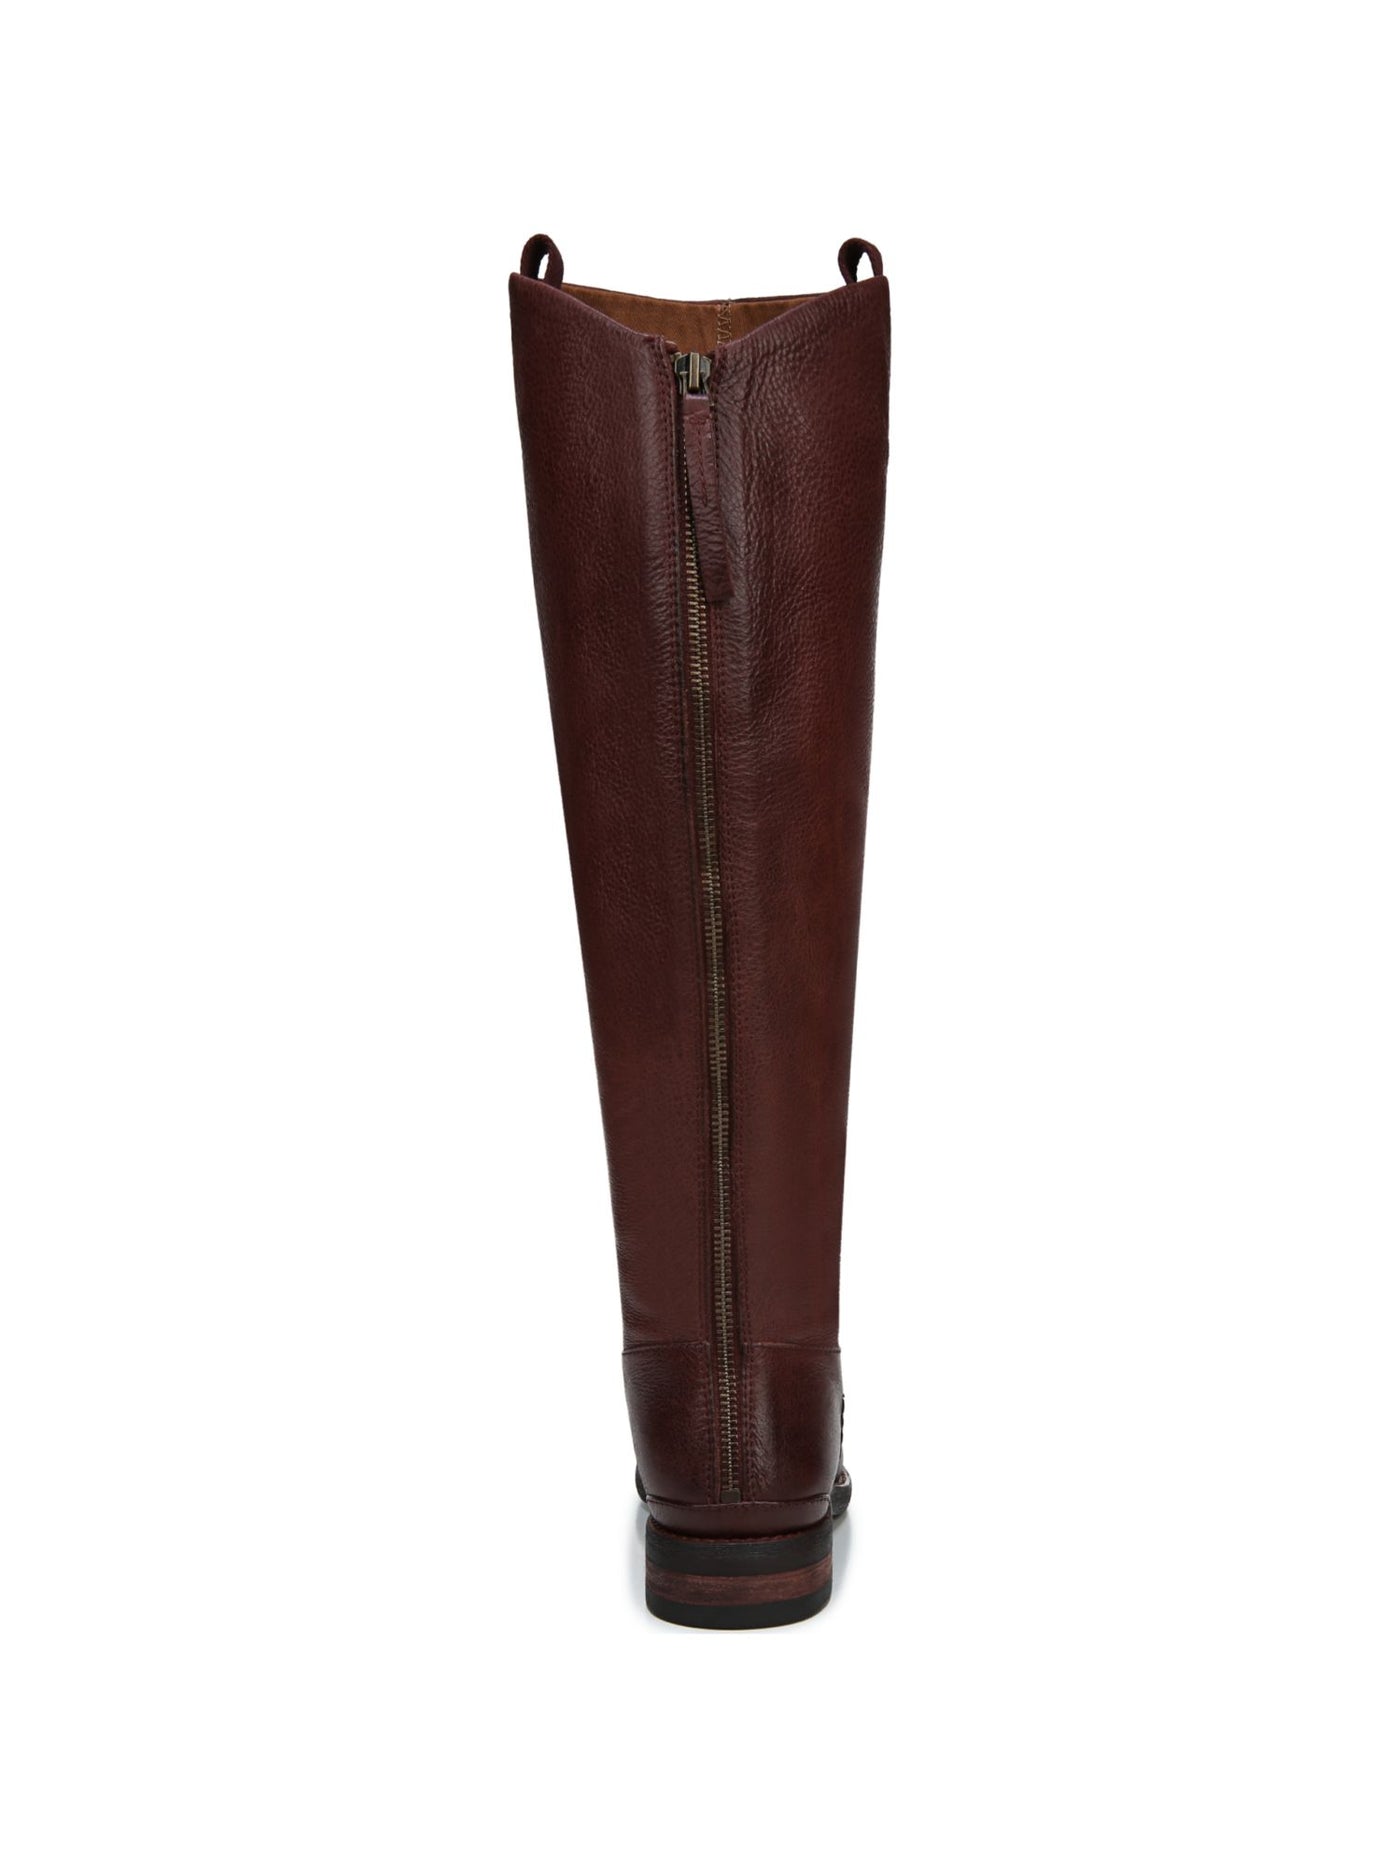 FRANCO SARTO Womens Maroon Stitch Detailing Padded Meyer Almond Toe Block Heel Zip-Up Leather Riding Boot 7.5 W